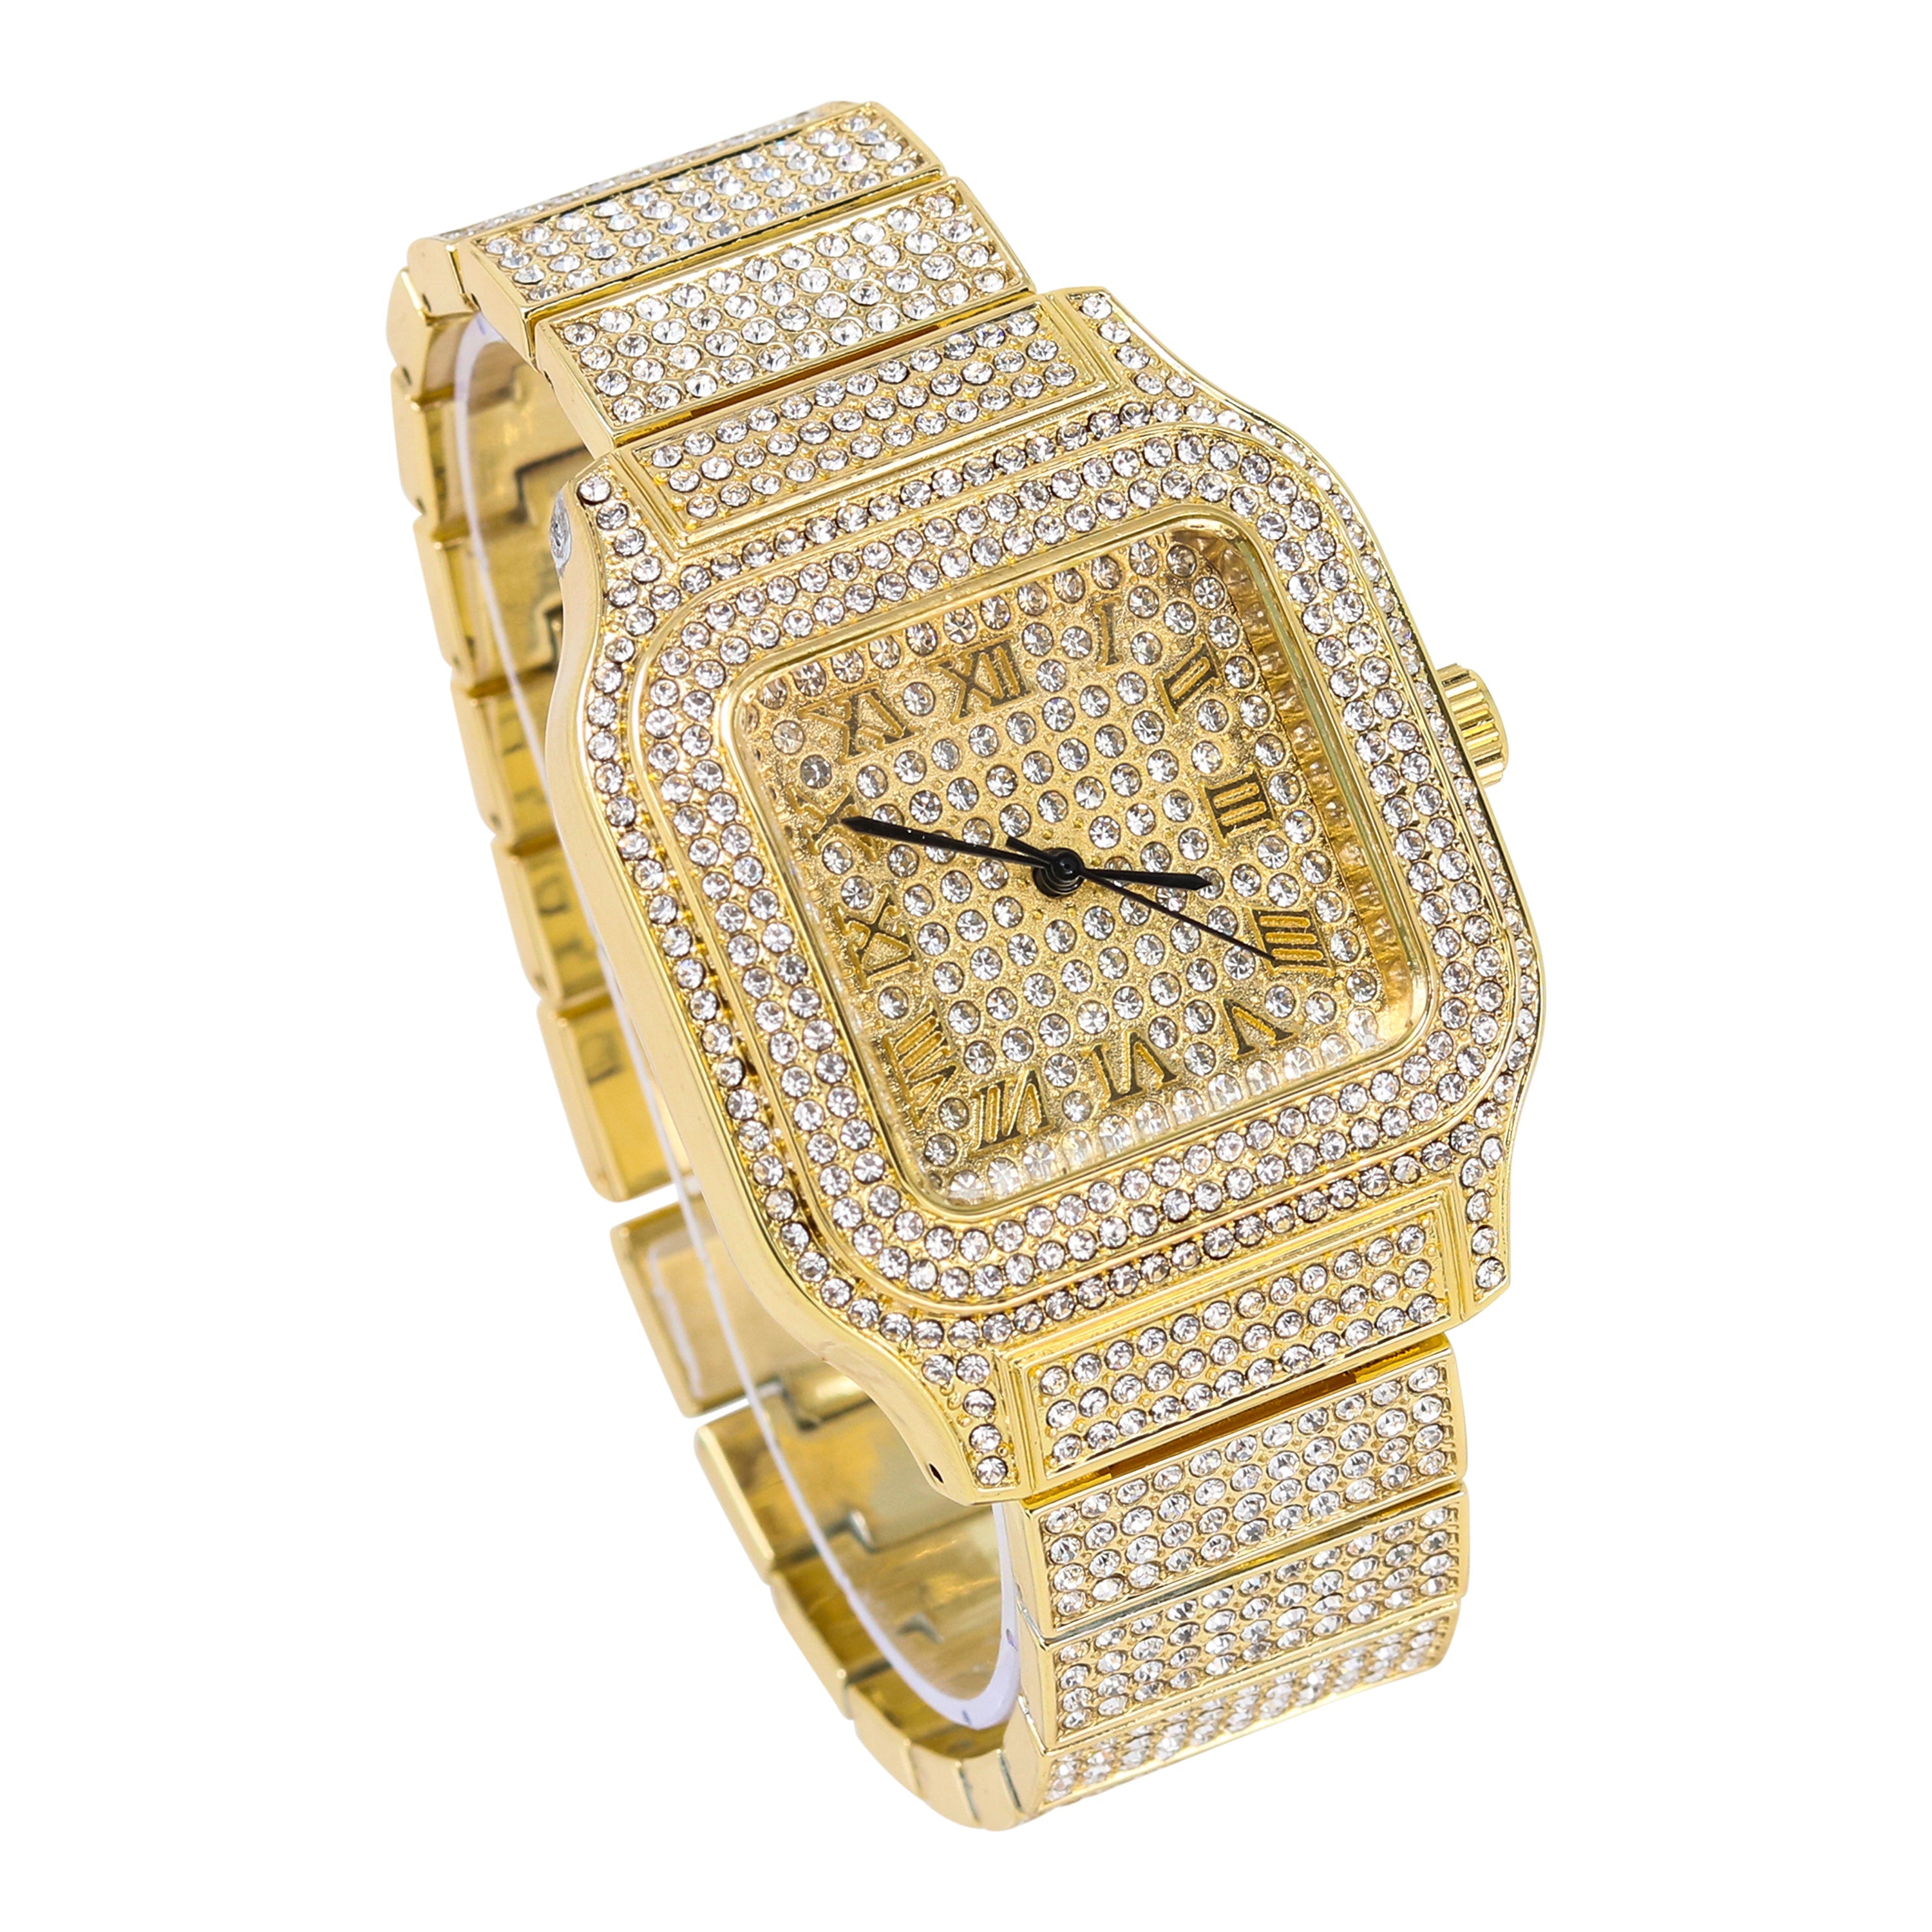 Women's Square Iced Out Watch 40mm Gold - Roman Dial